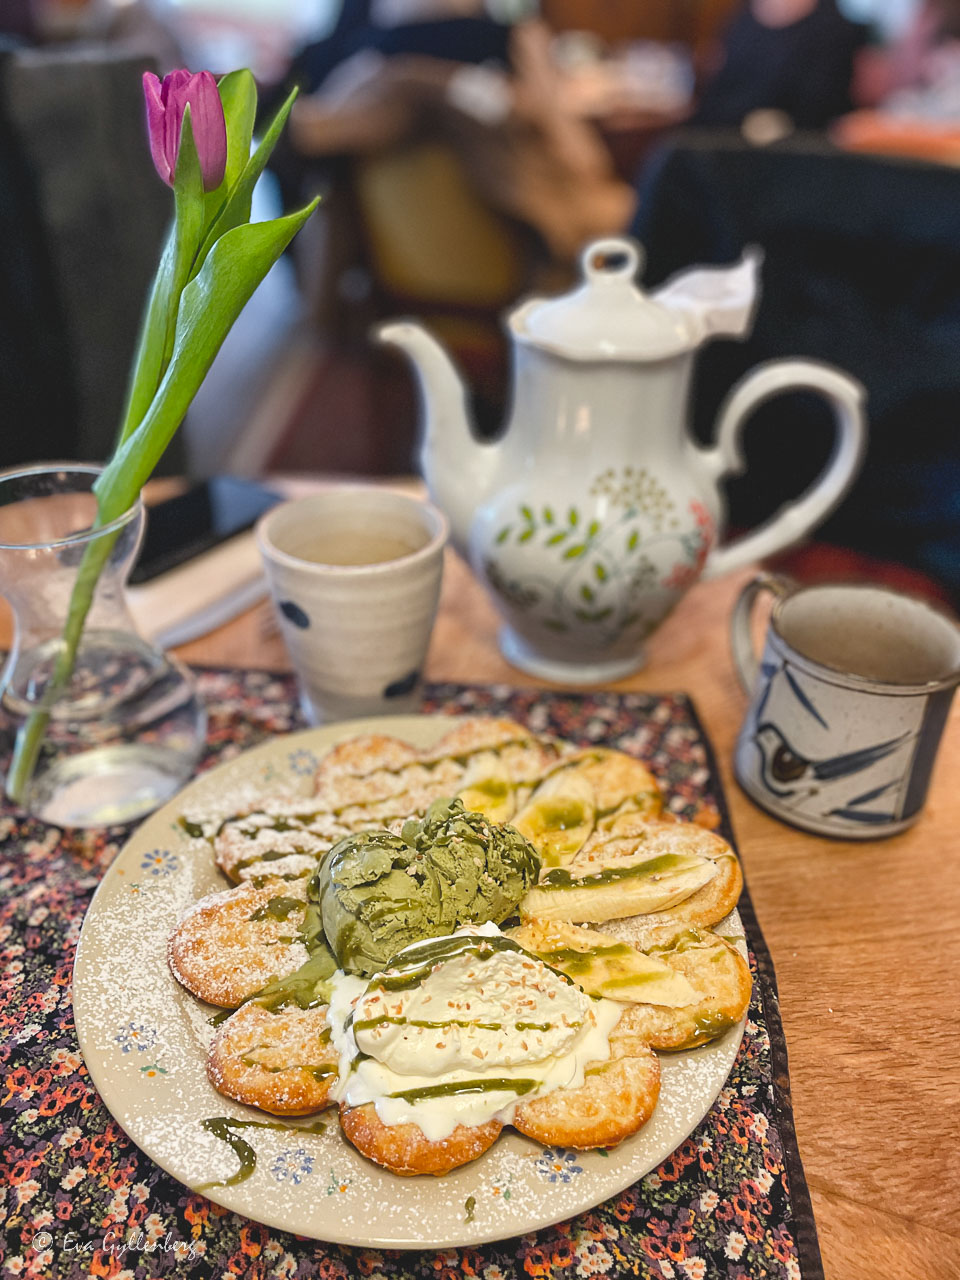 Waffle with macha ice cream on a table with a pot of coffee and a tulip